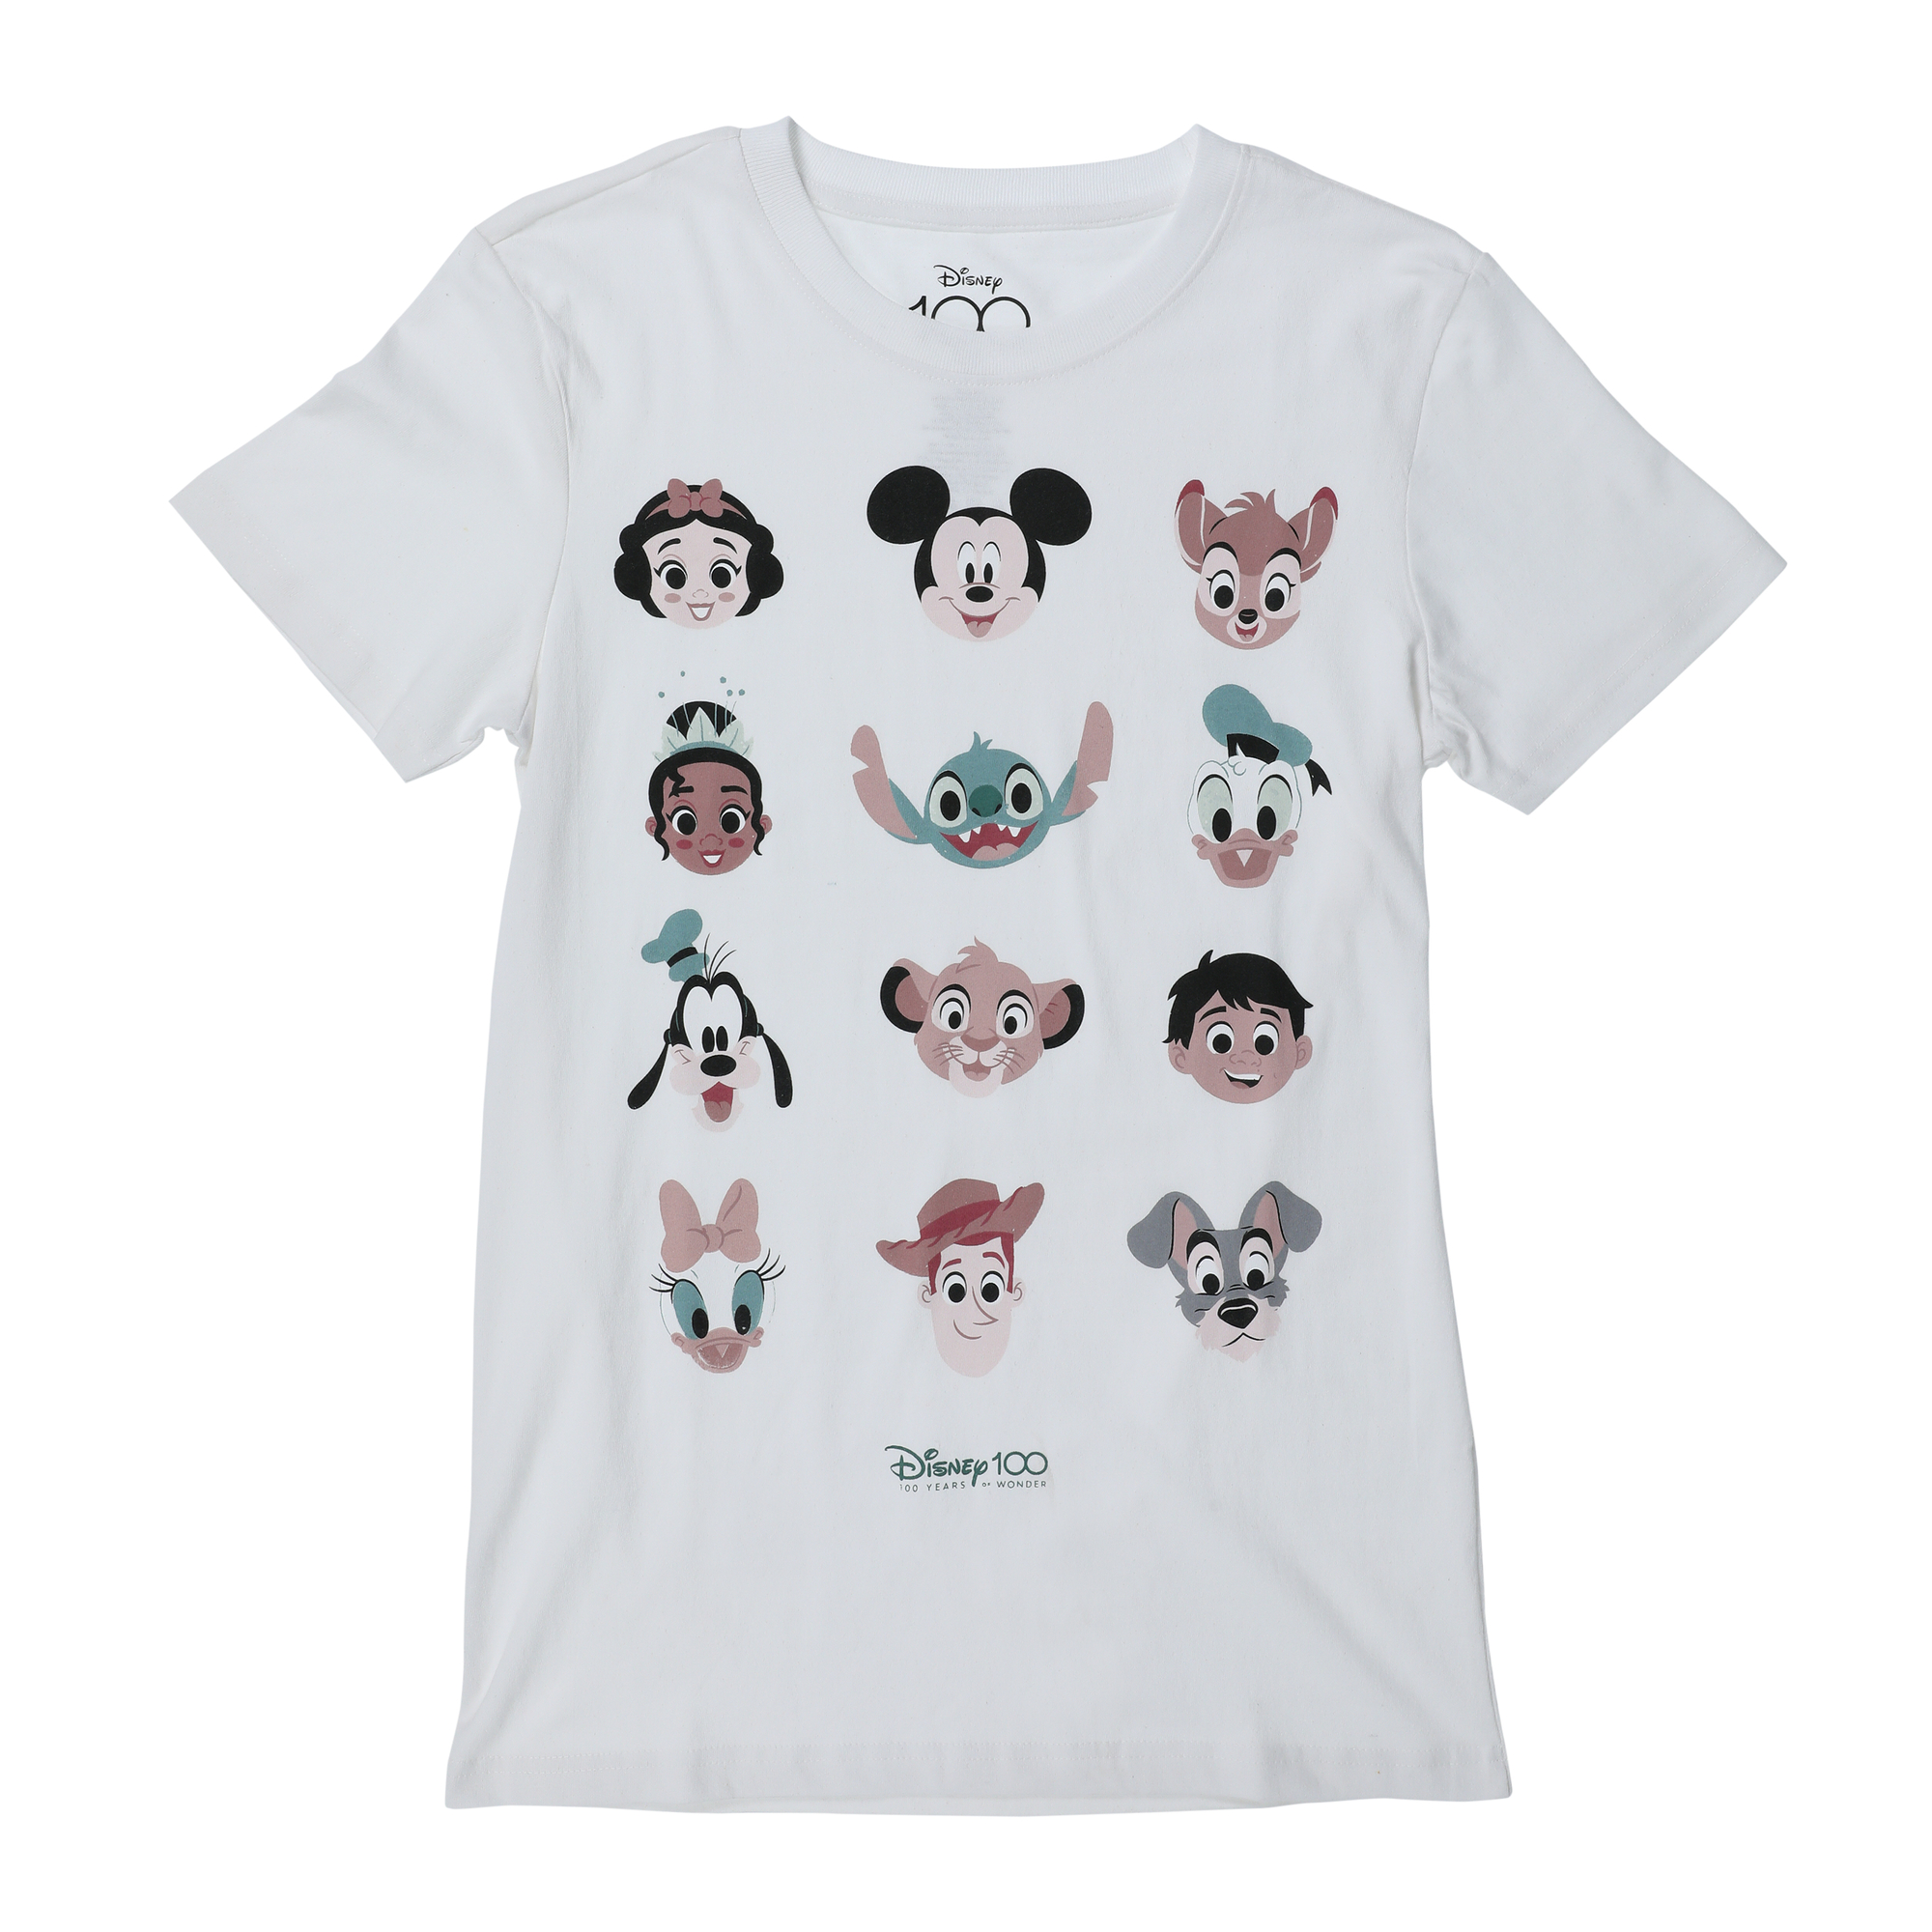 Disney character faces graphic tee